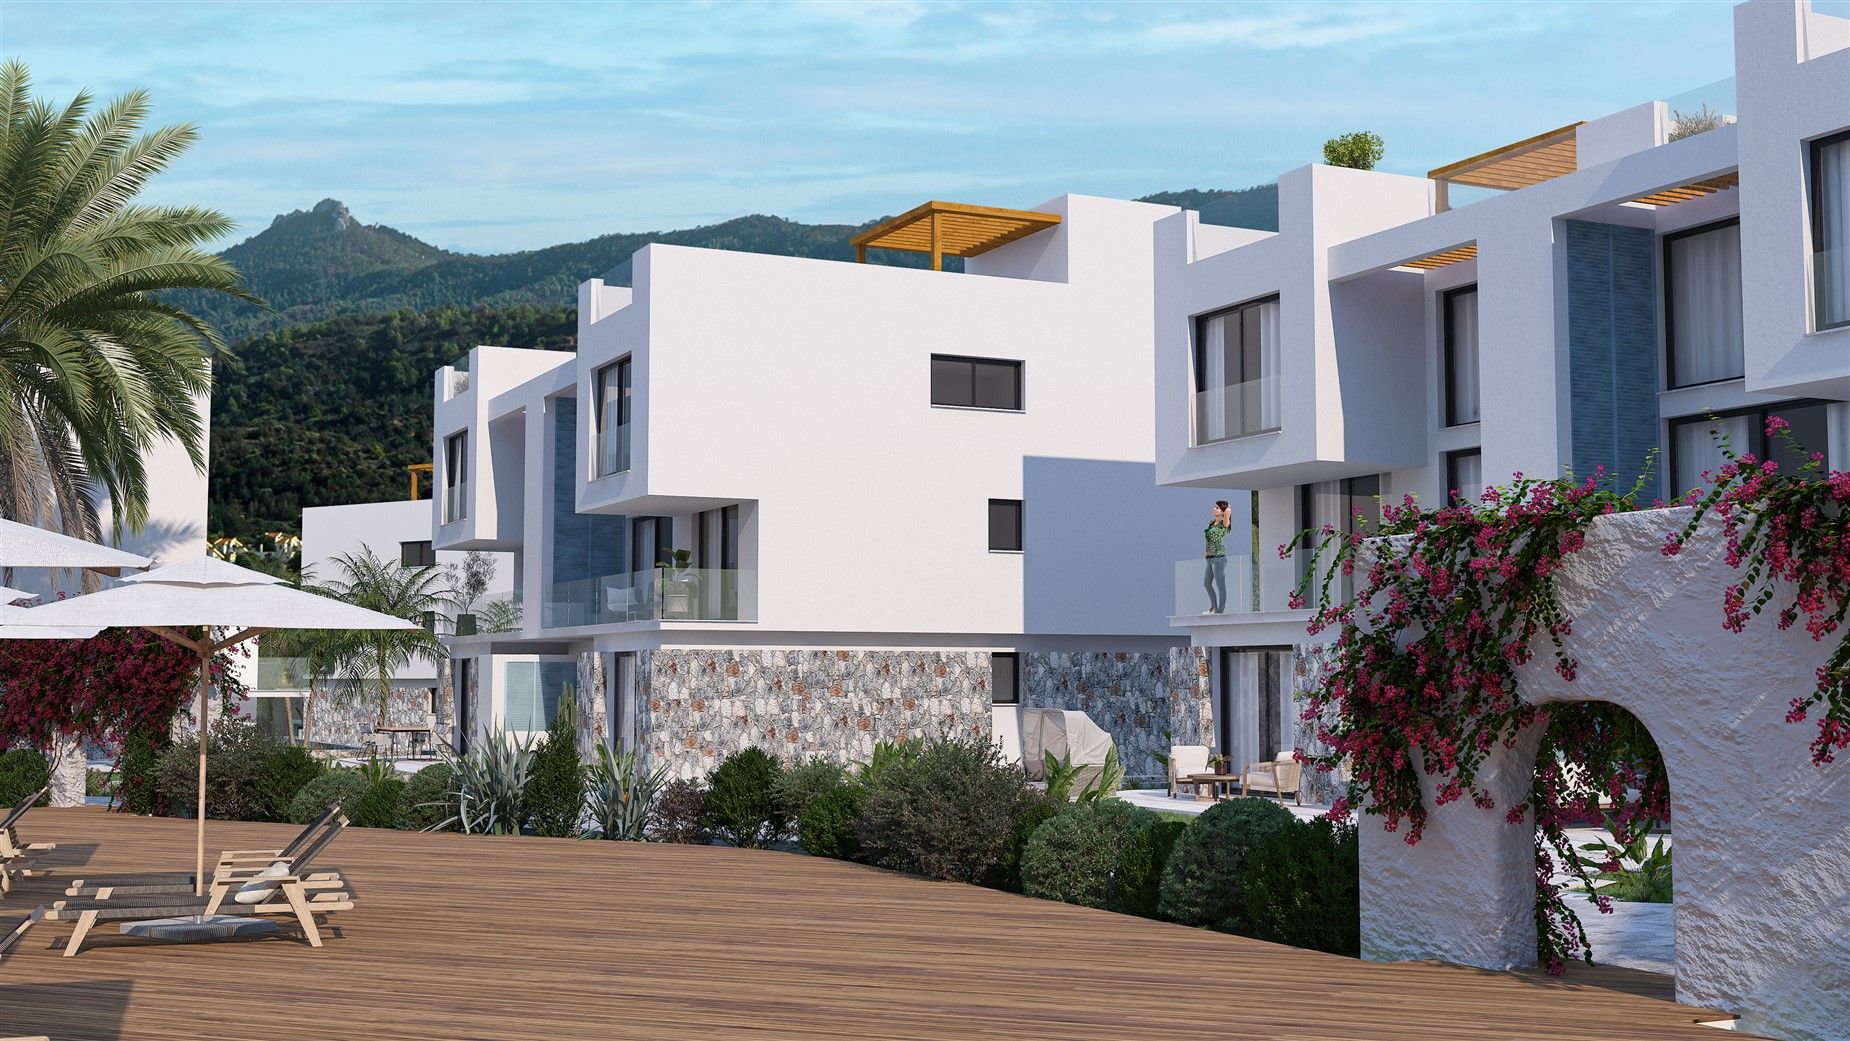 New project on the seashore - Northern Cyprus, Gazimagusa district